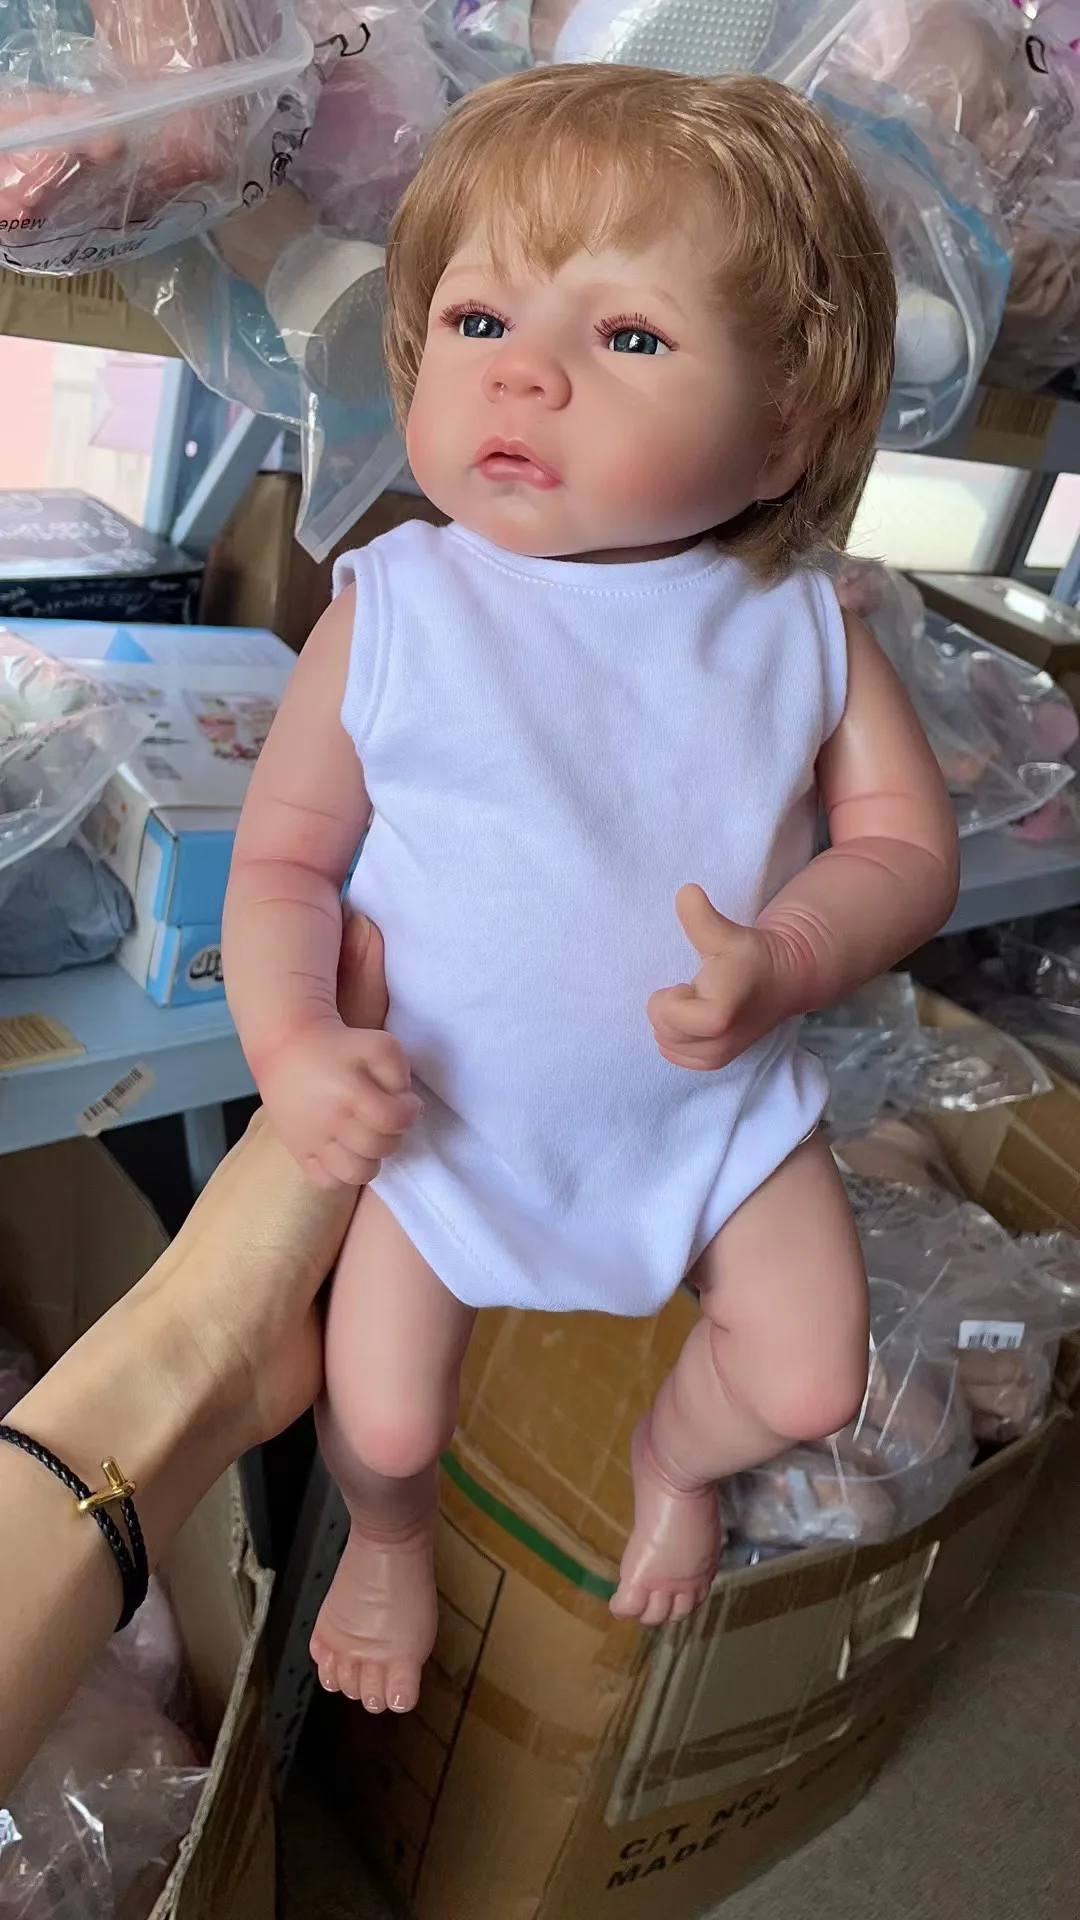 

46cm Reborn Baby Dolls Bebe Lifelike Newborn Cute Full Silicone Body Toy for Children Christmas Surprise Gift Drop Shipping